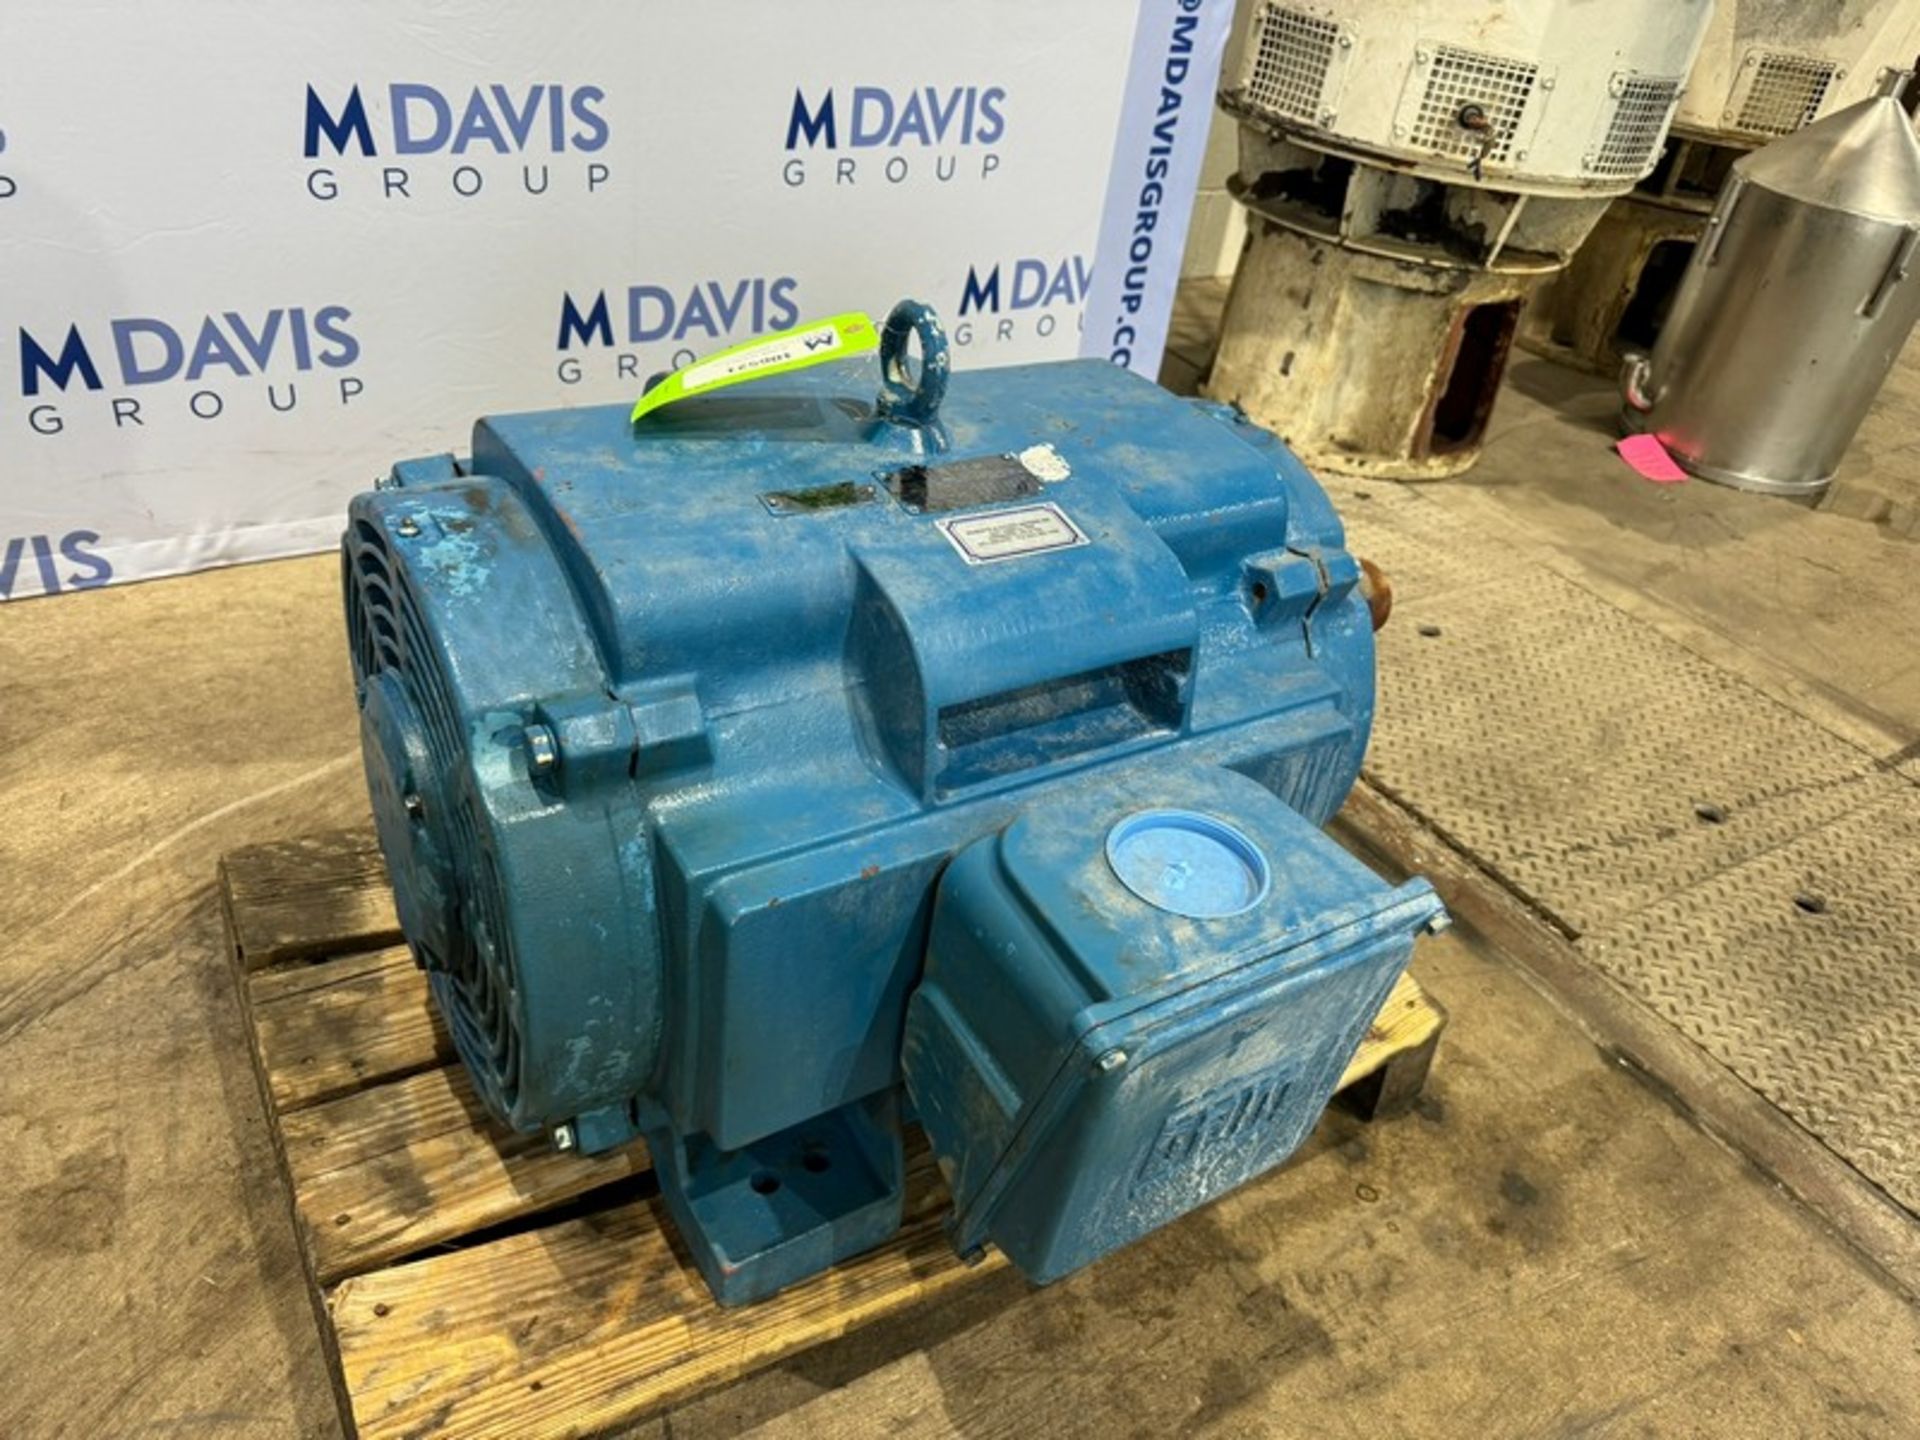 WEG 100 hp Motor, 208-230/460 Volts, 3 Phase, 1775 RPM (INV. #106521) (LOCATED MONROEVILLE, PA) ( - Image 2 of 6